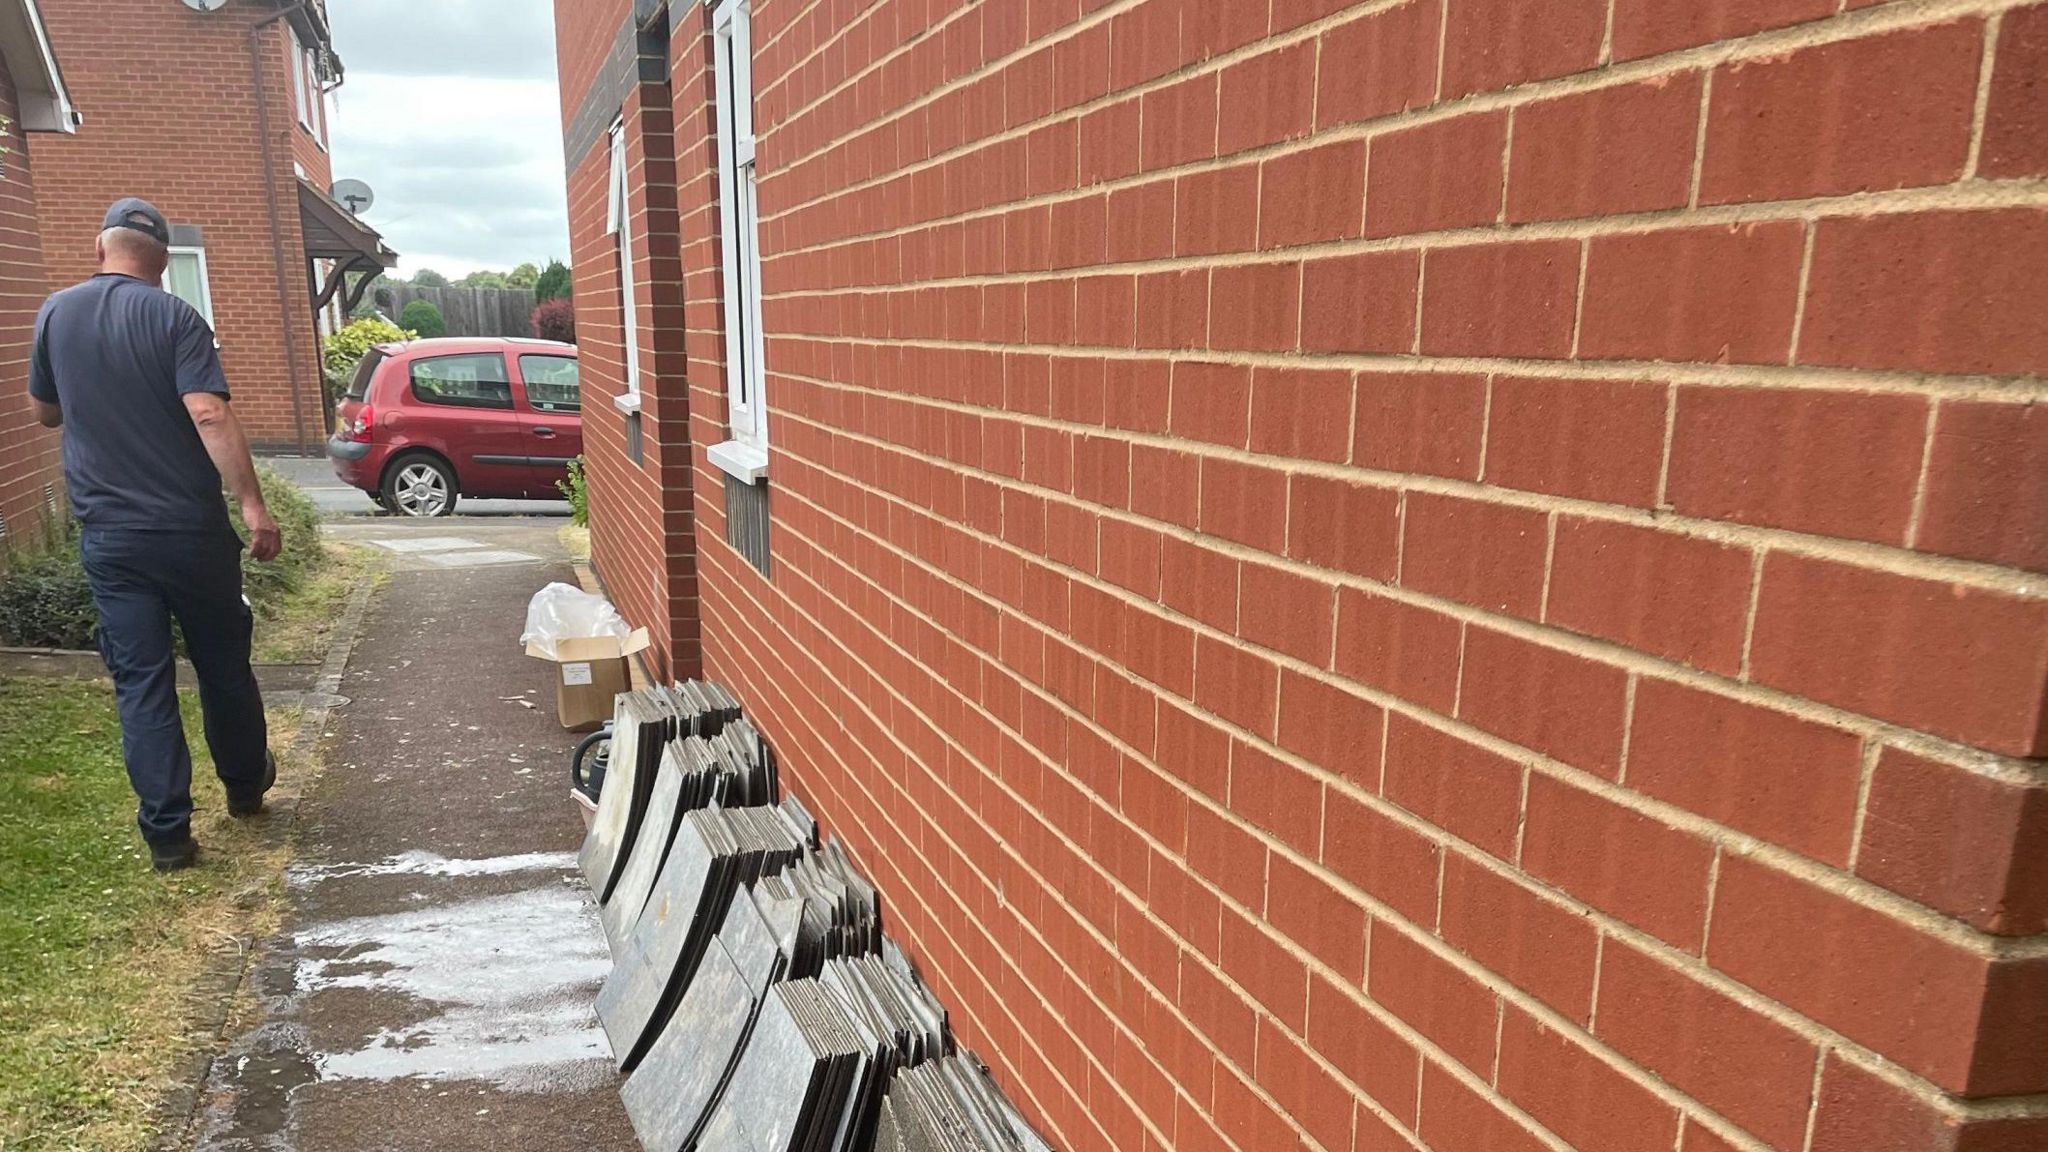 Grey tiles lined up against a brick wall